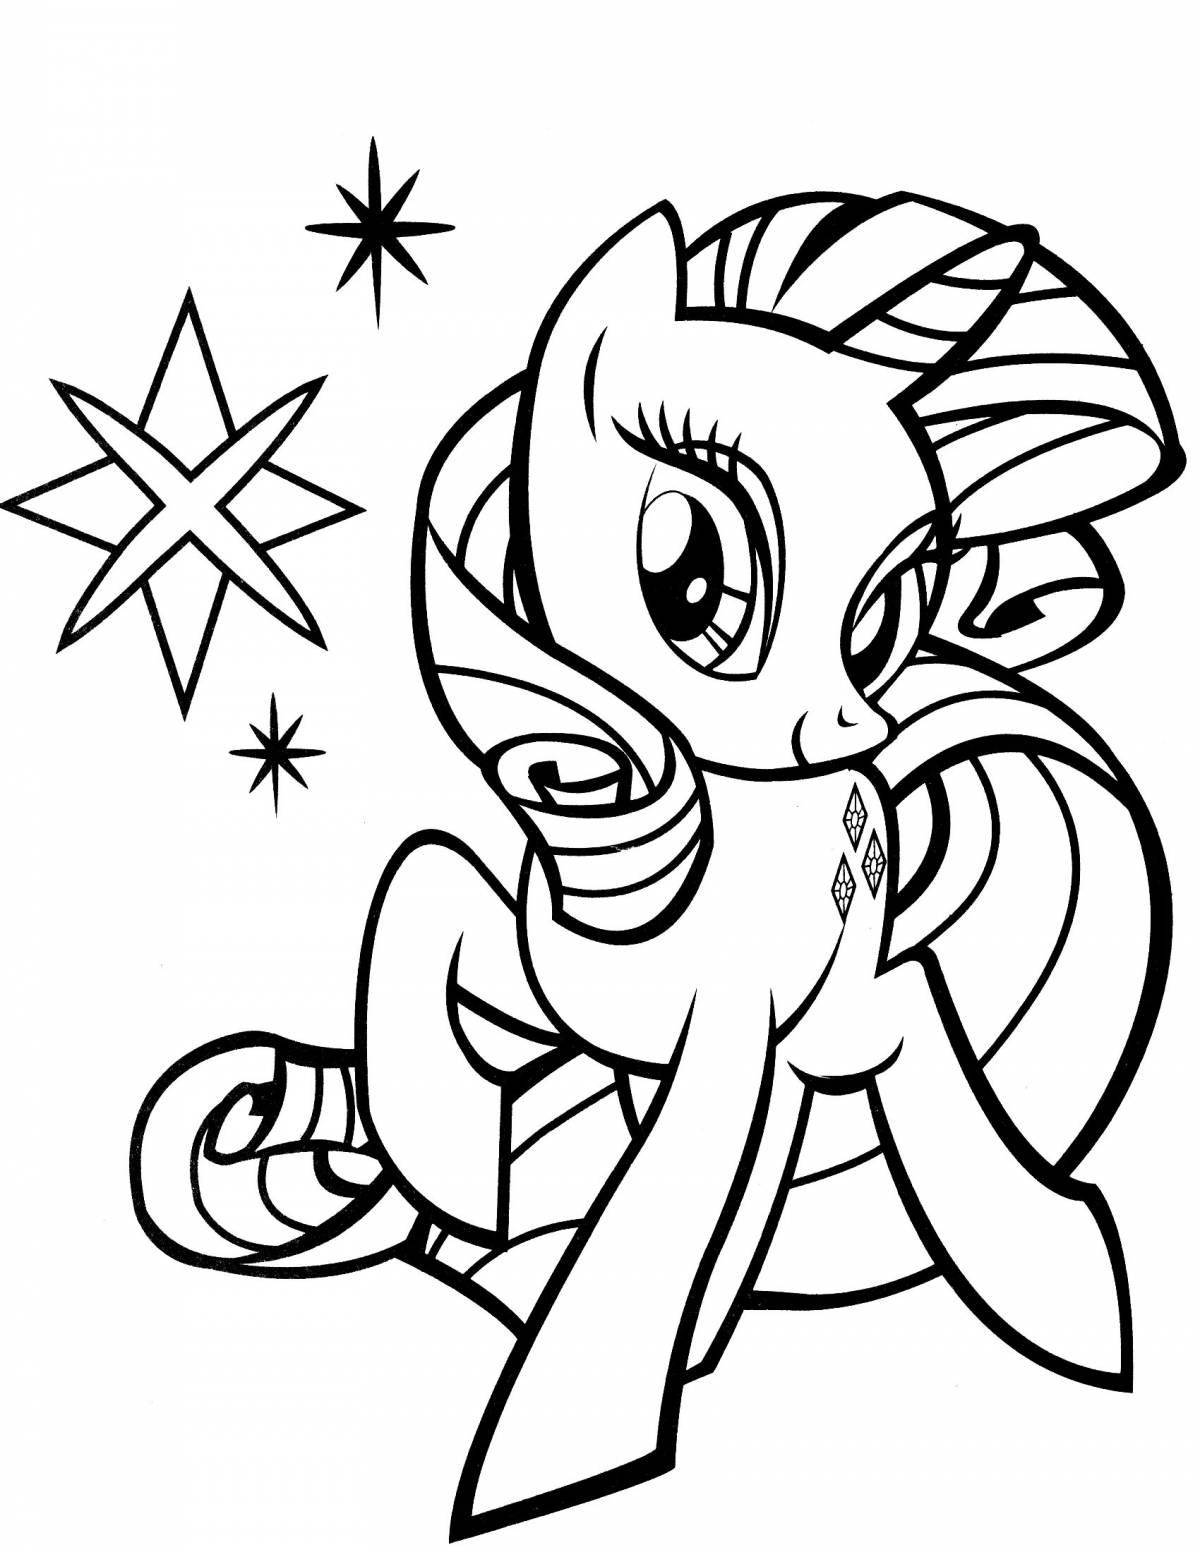 Majestic pony coloring page